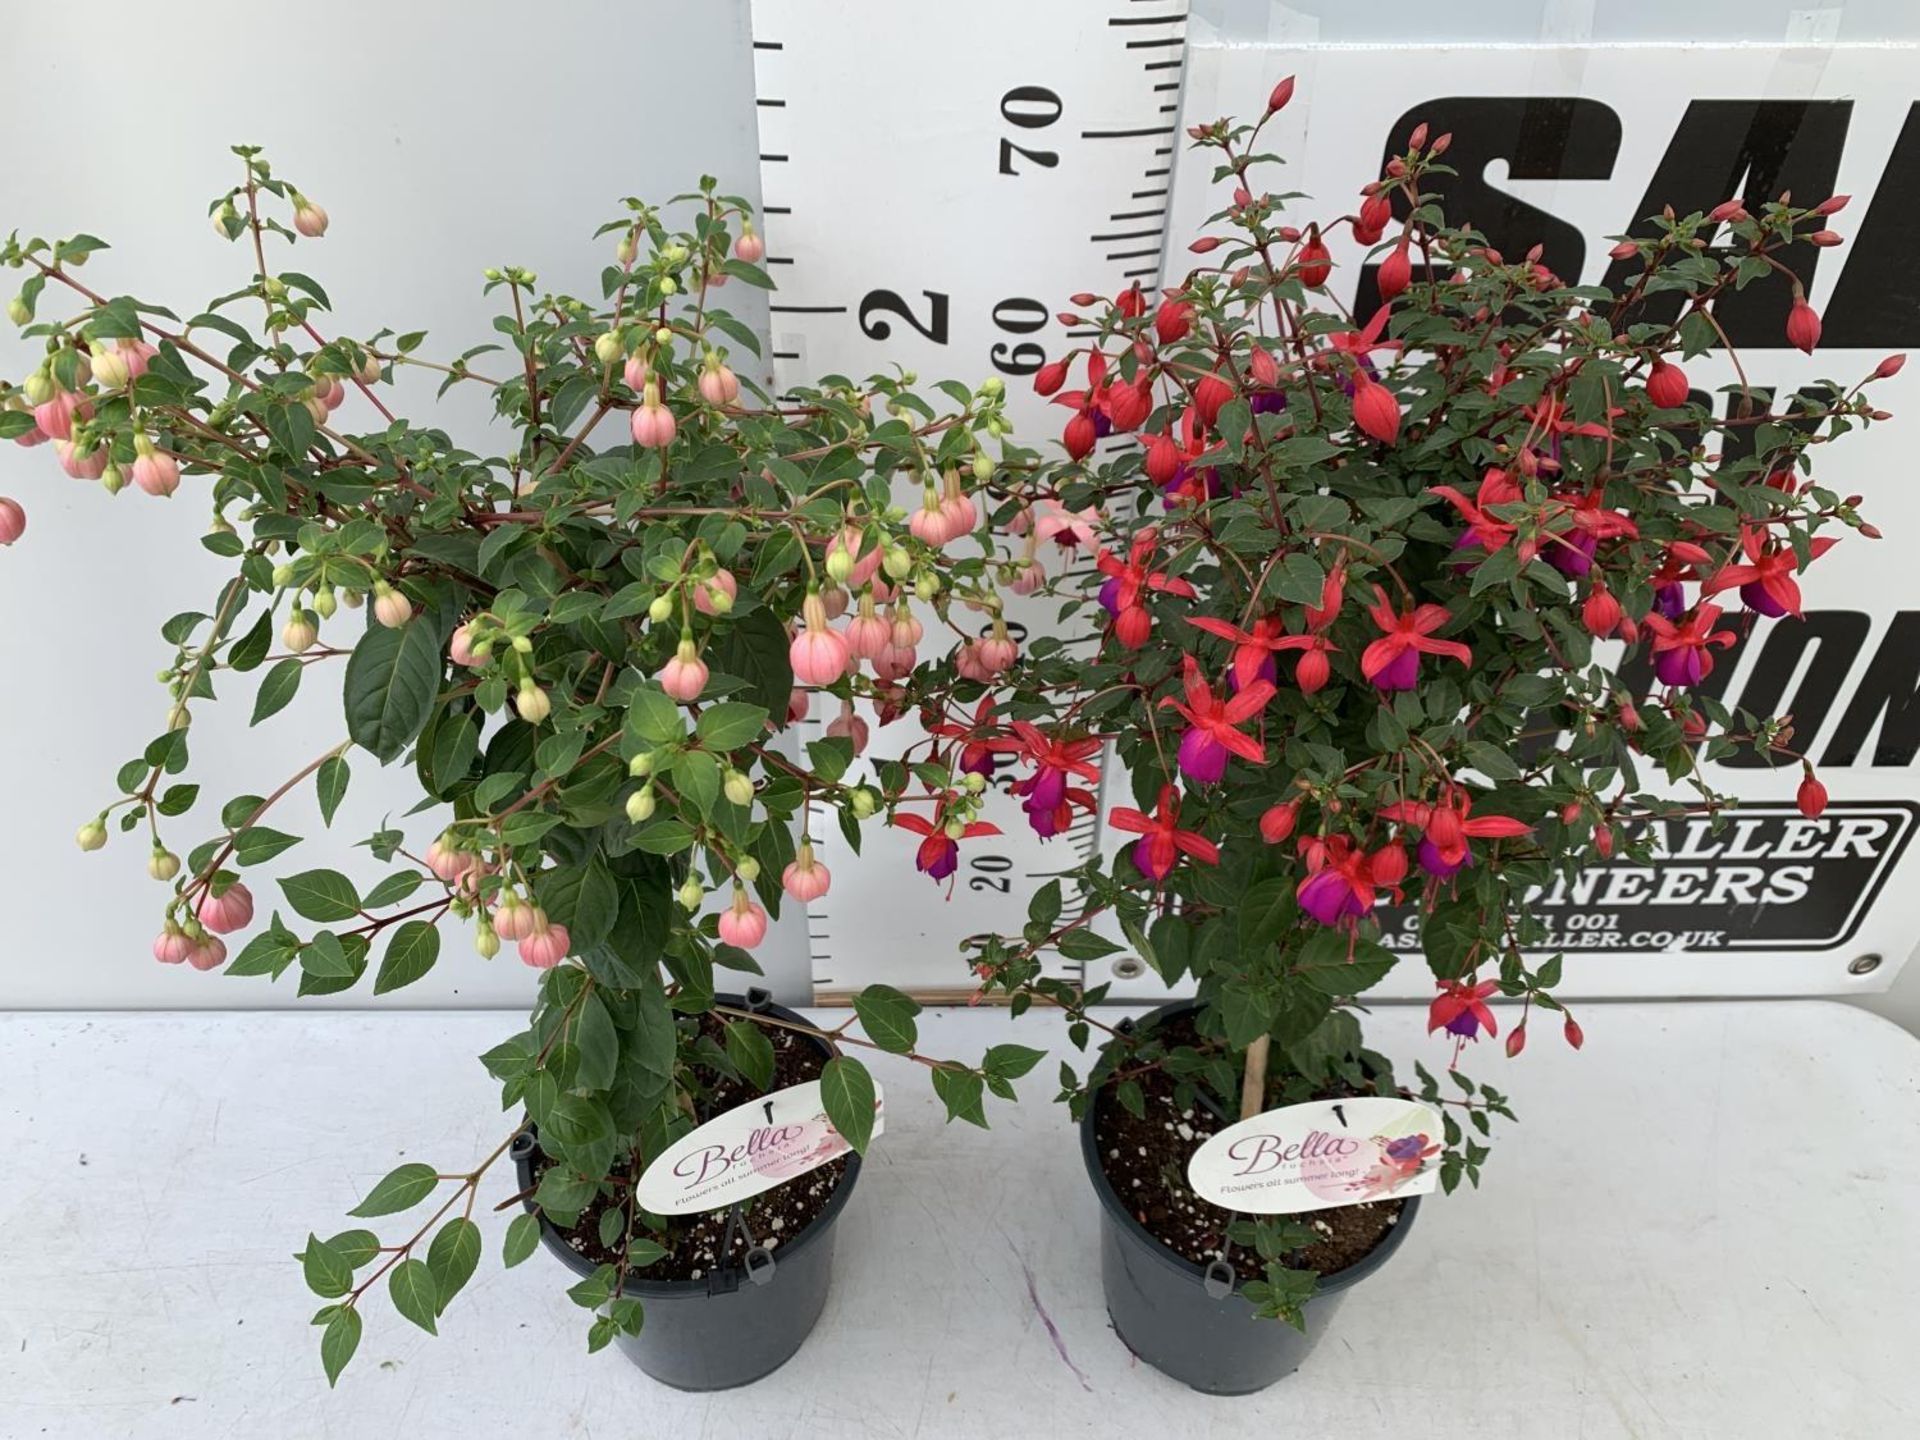 TWO BELLA STANDARD FUCHSIA IN A 3 LTR POTS 70CM -80CM TALL TO BE SOLD FOR THE TWO PLUS VAT - Image 4 of 8